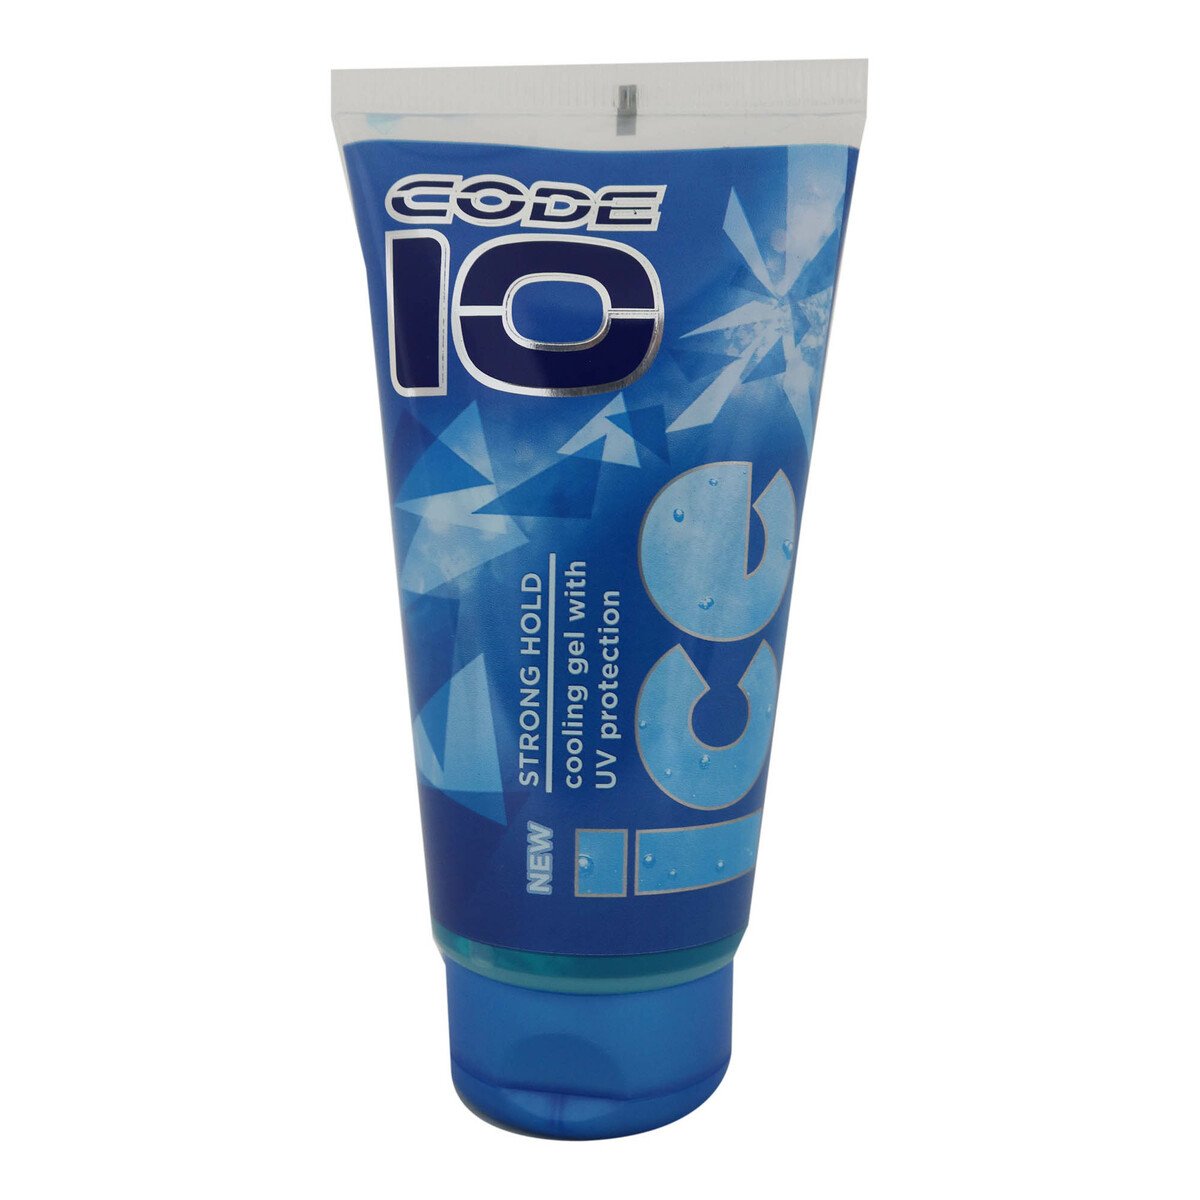 Code 10 Gel Ice Strong Hold 150ml